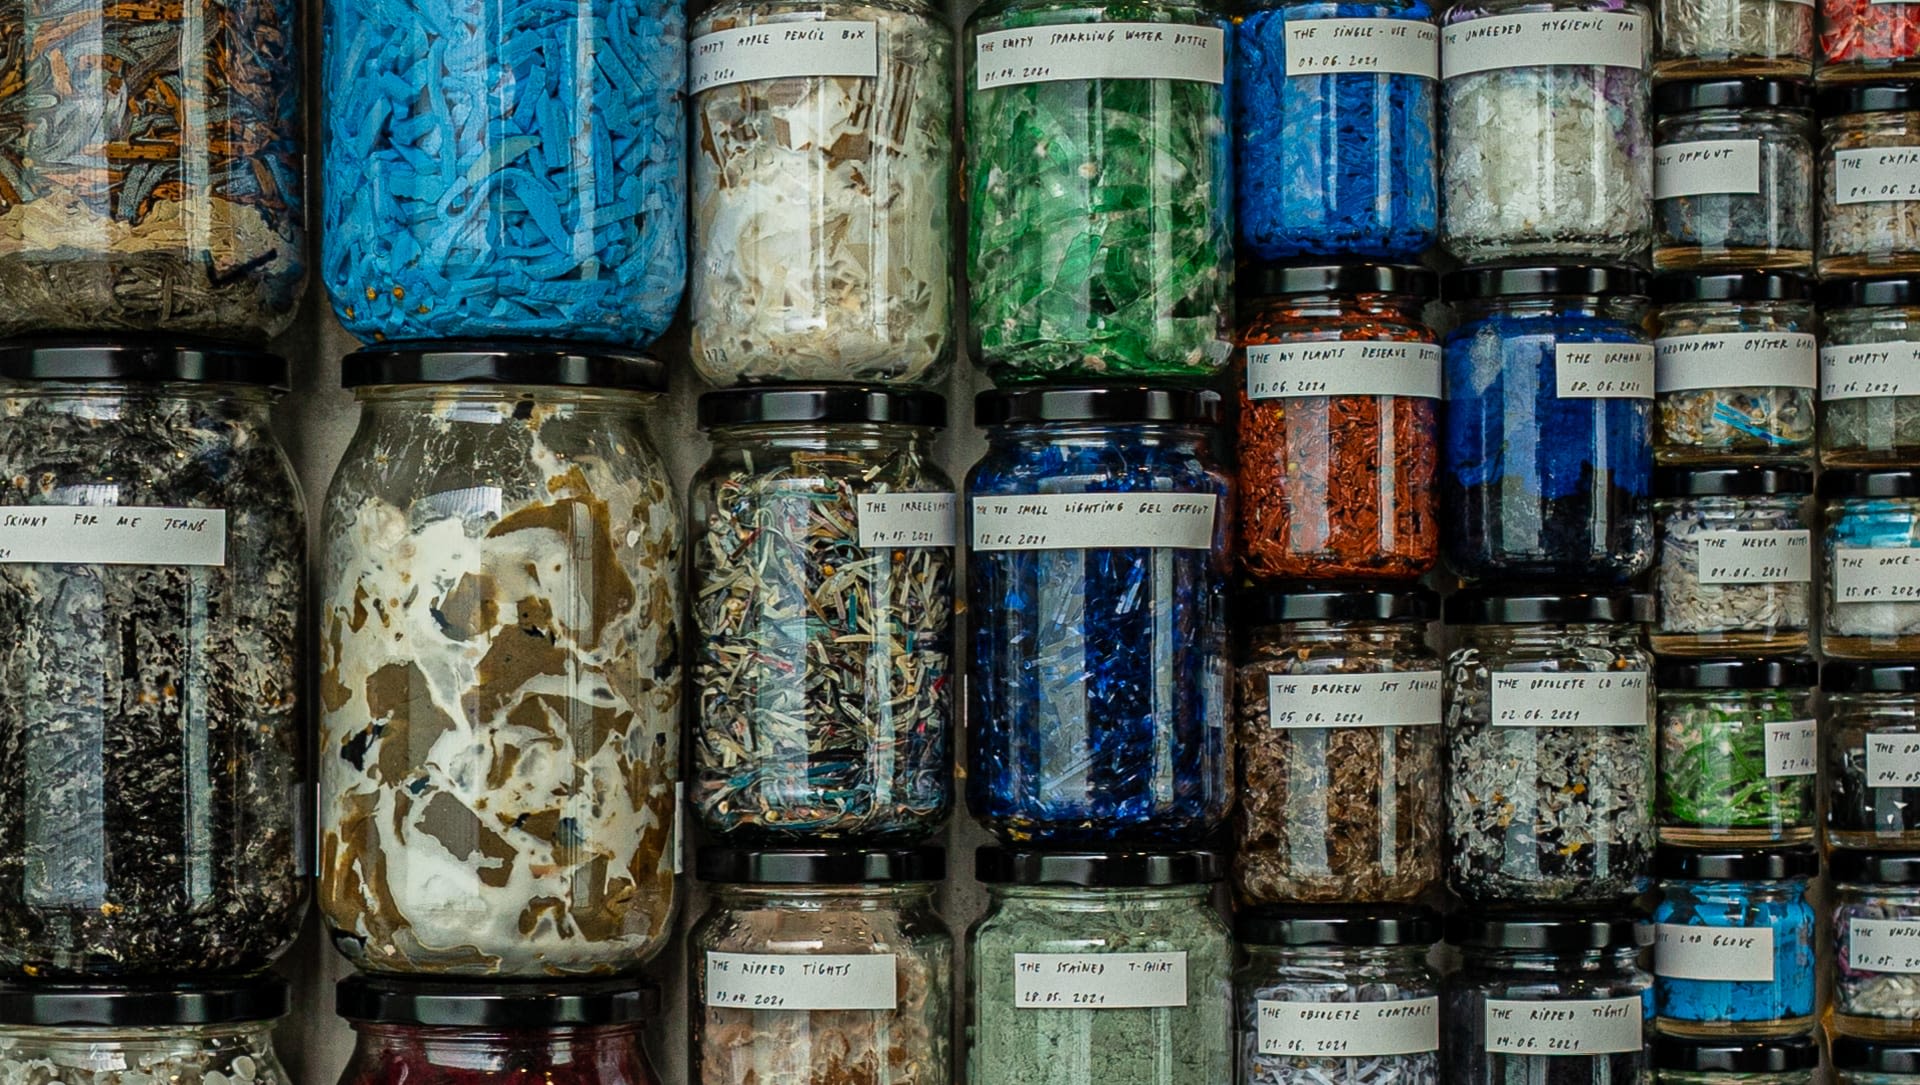 Jars filled with small pieces of plastic and other waste materials